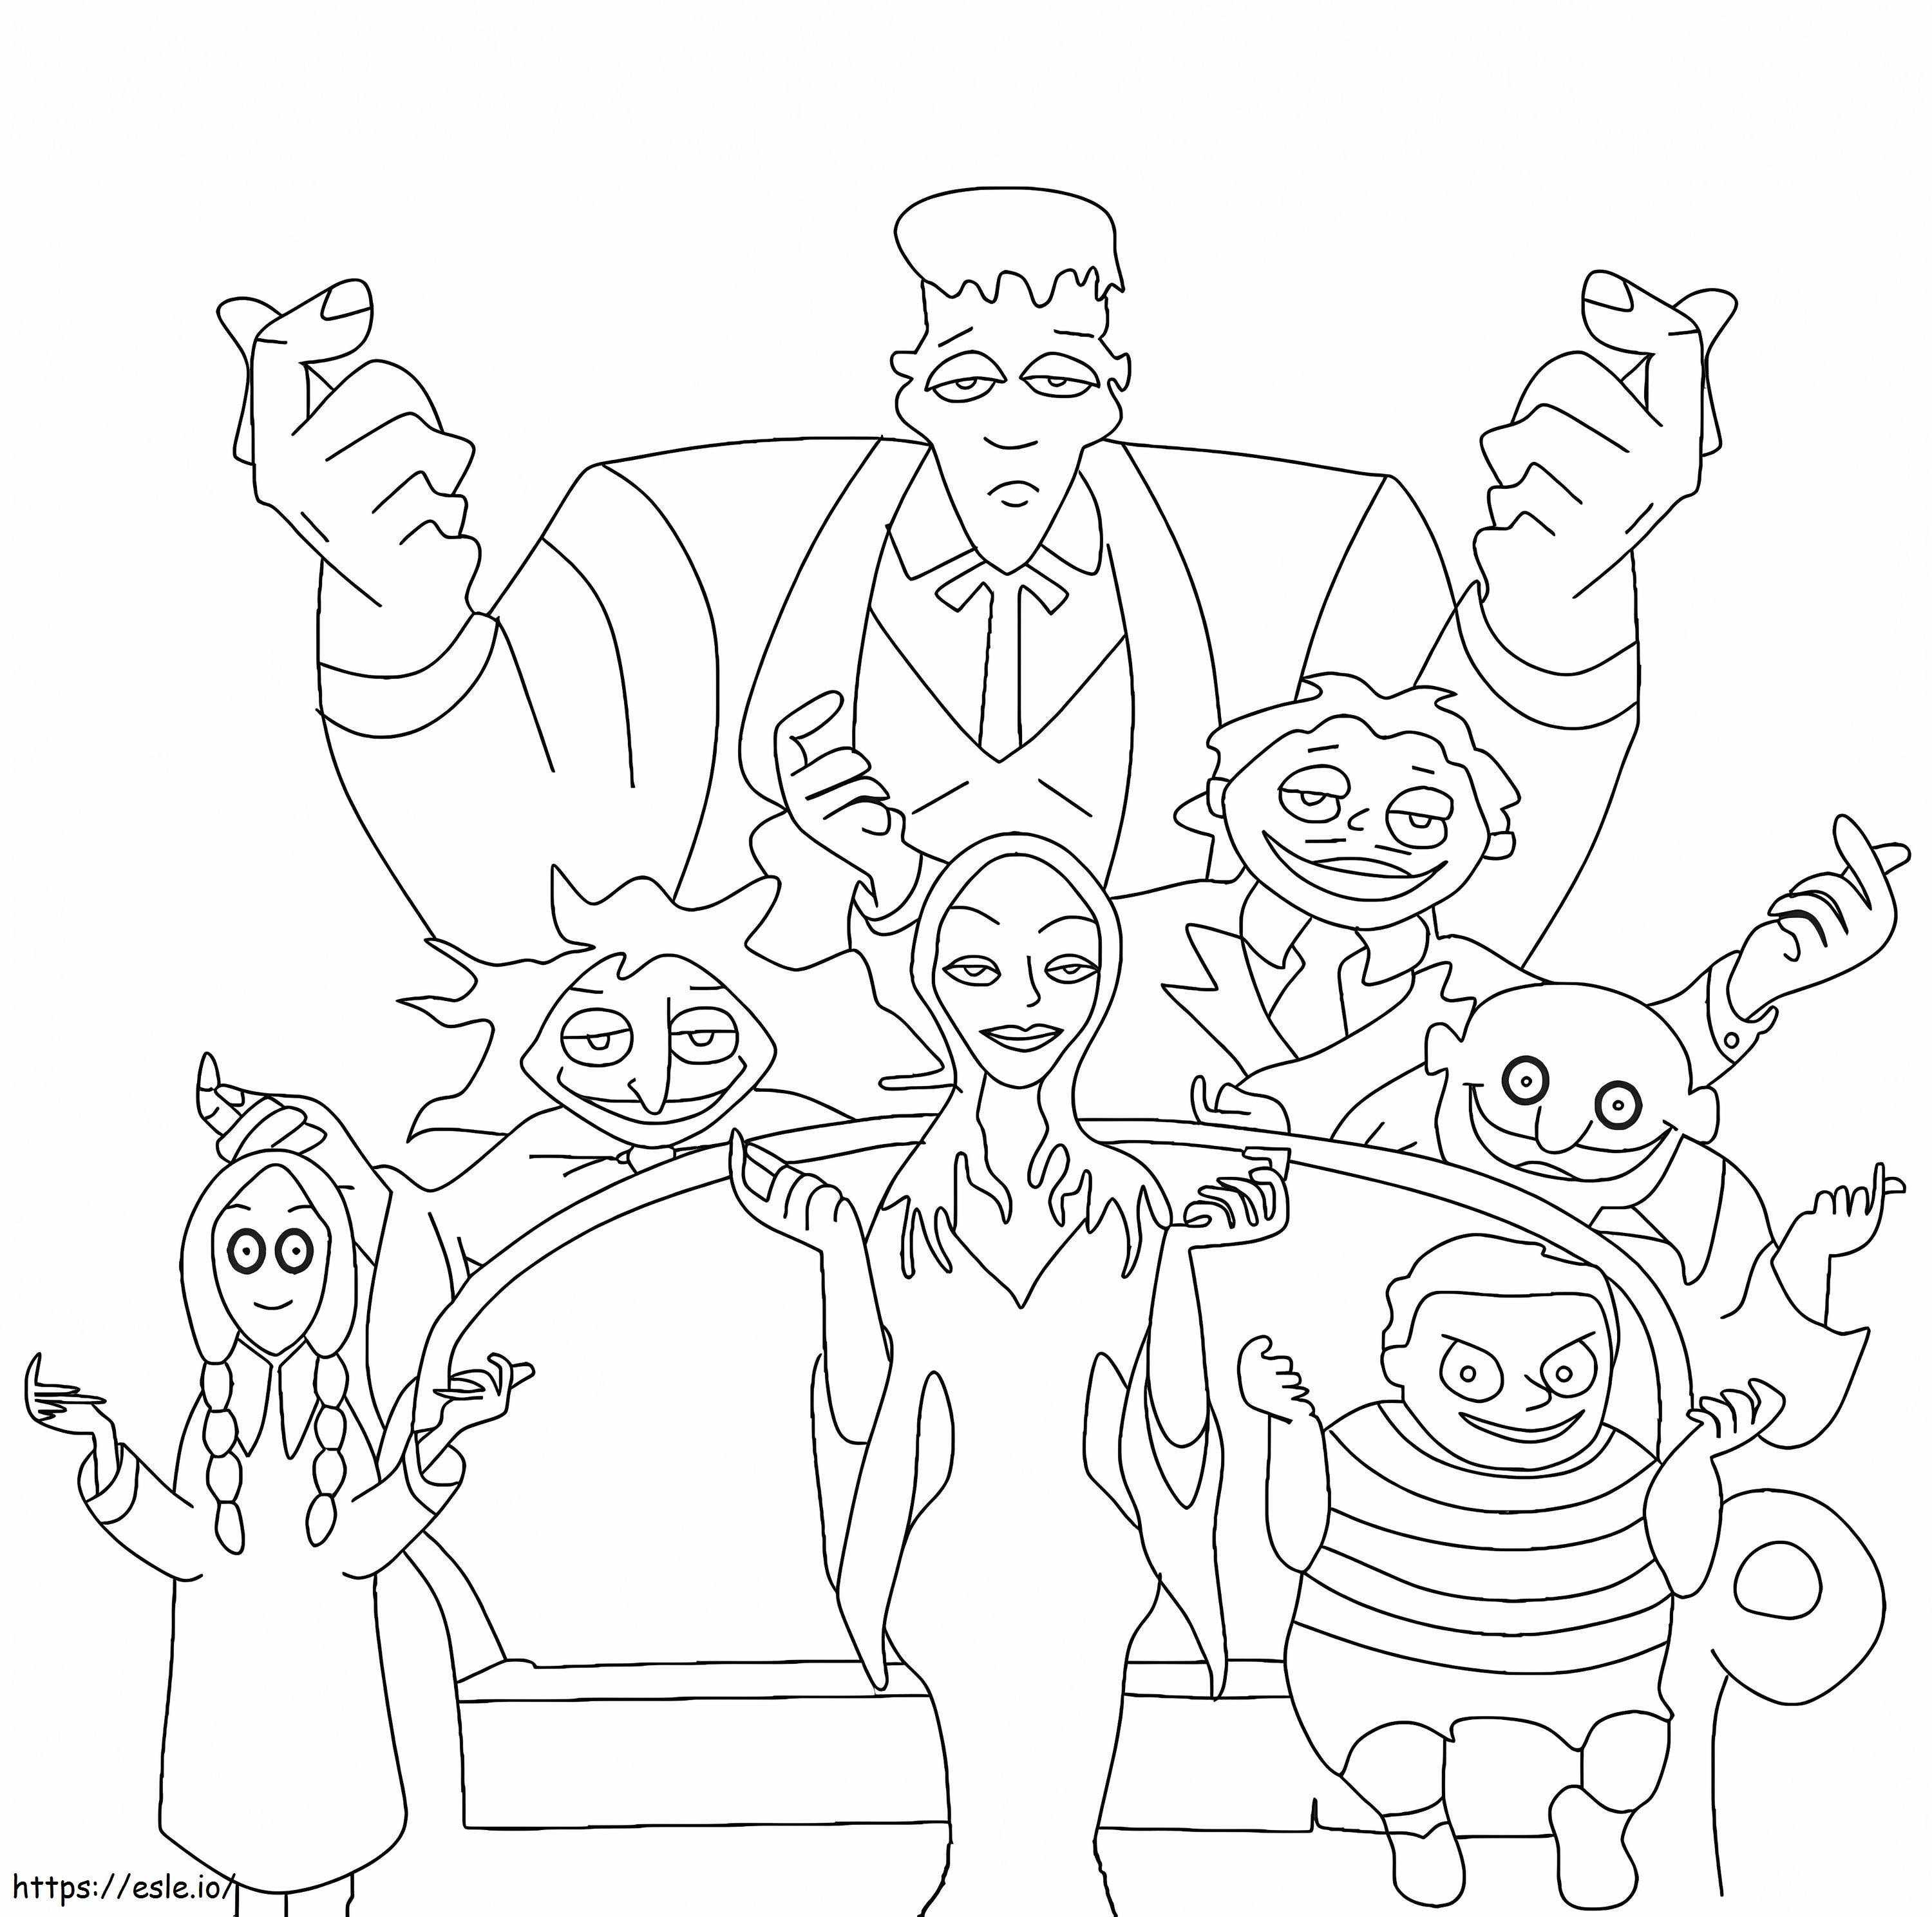 Free Printable The Addams Family coloring page